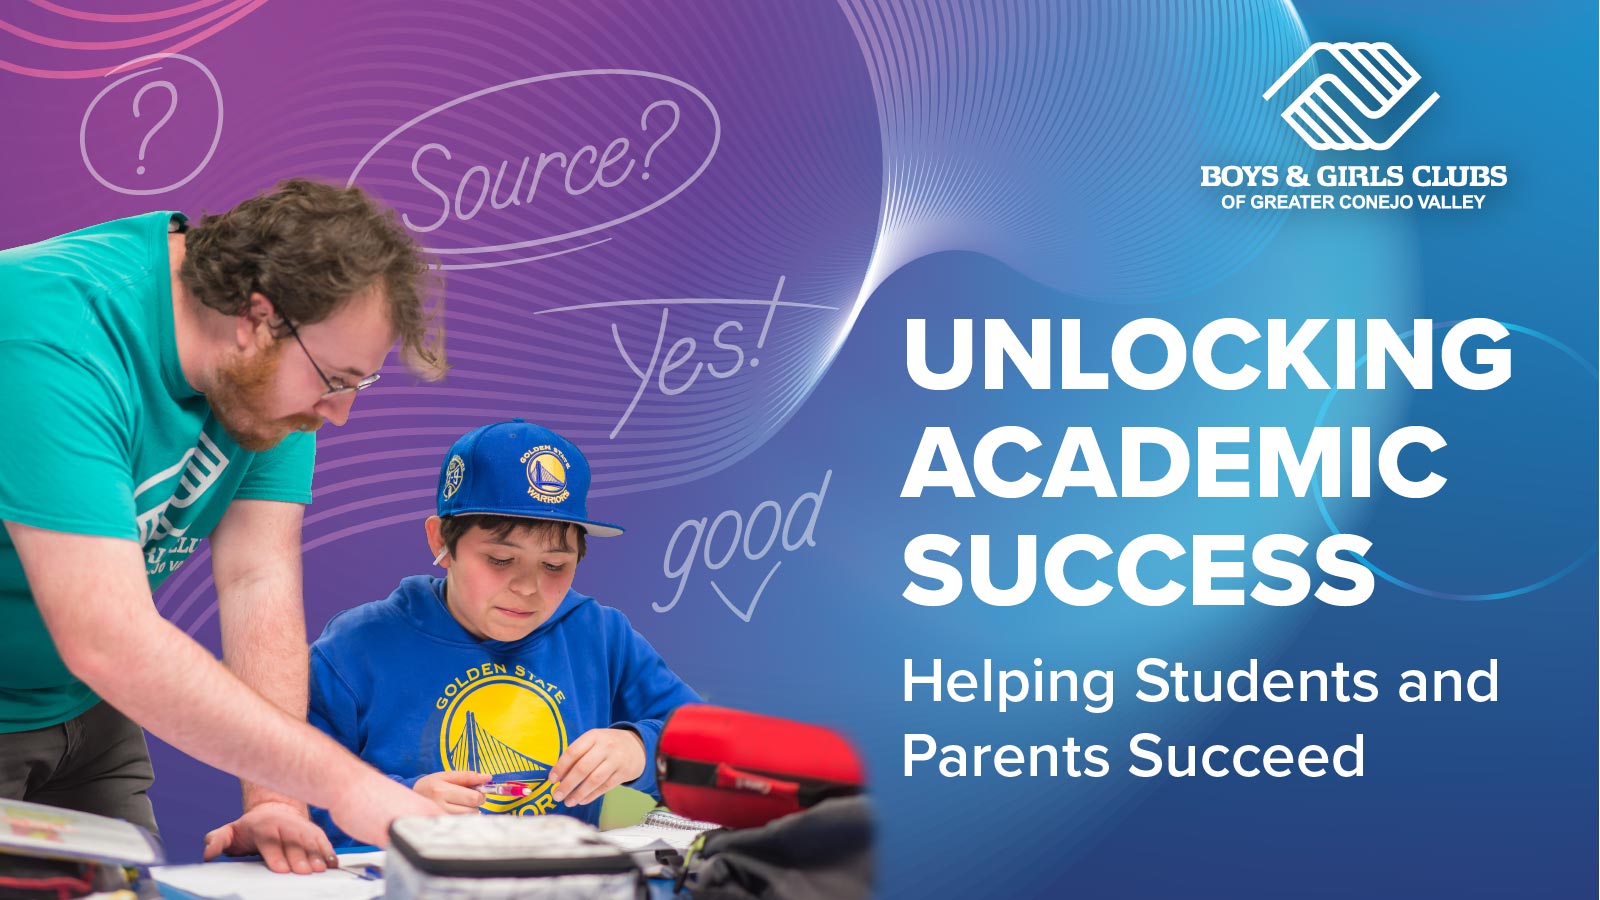 Unlocking Academic Success - Helping Students and Parents Succeed